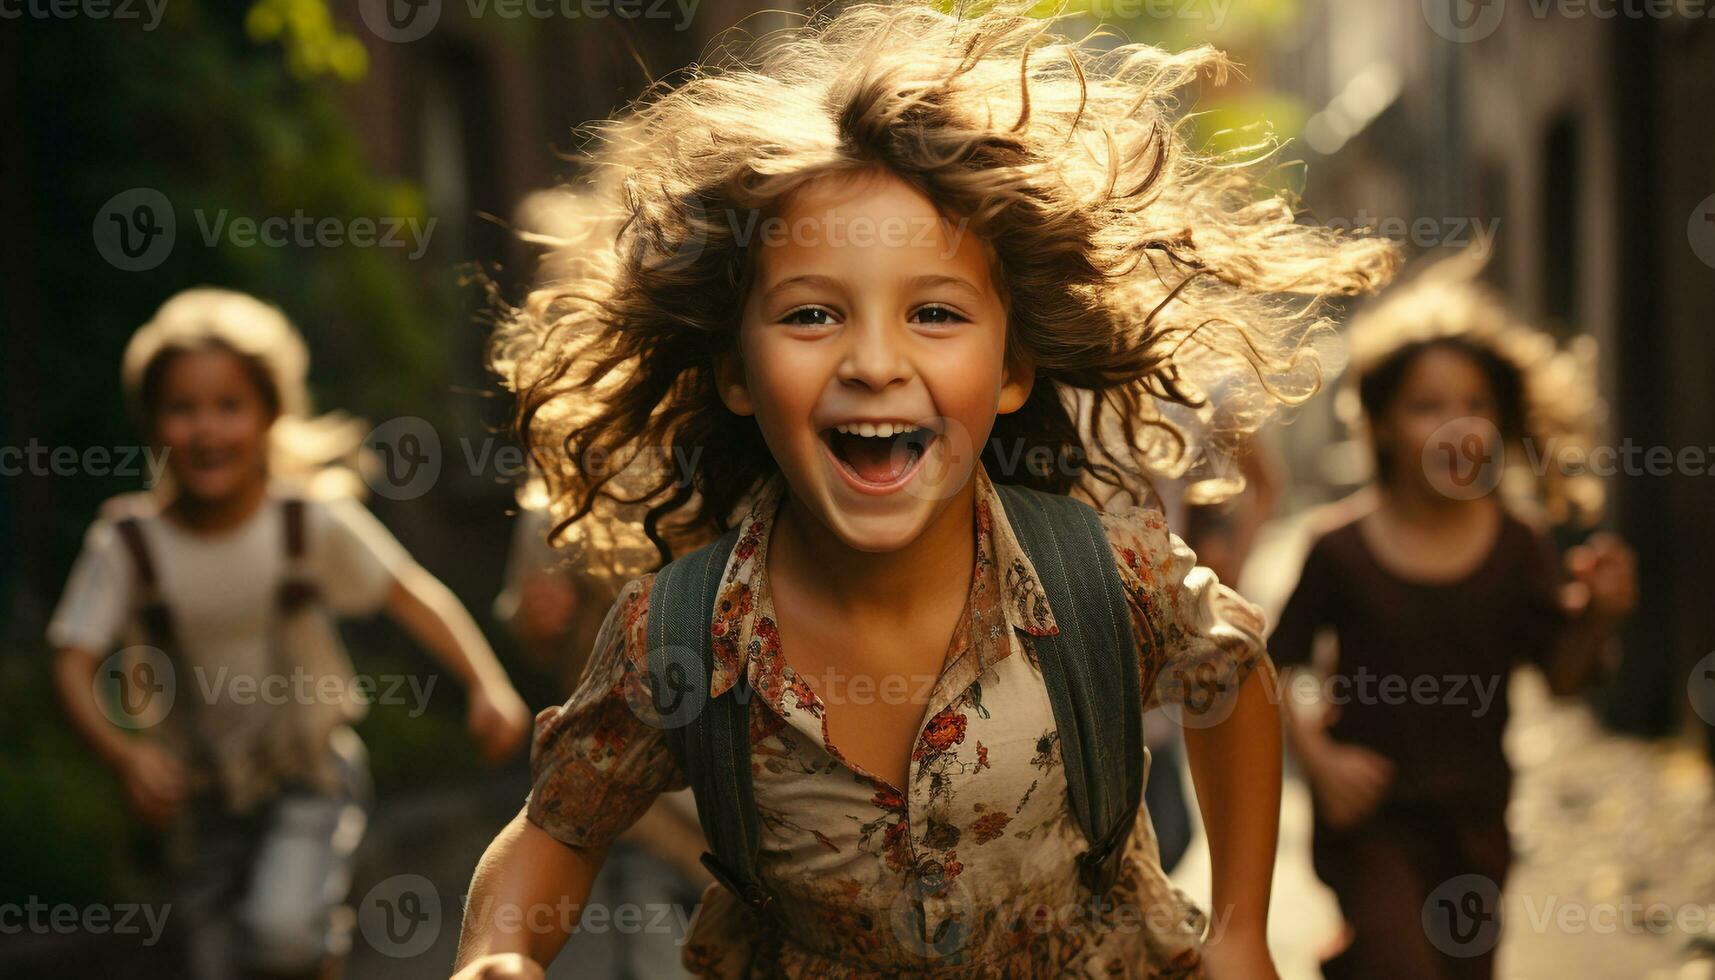 Smiling child, cheerful girls, fun summer, enjoyment, carefree childhood, nature generated by AI photo